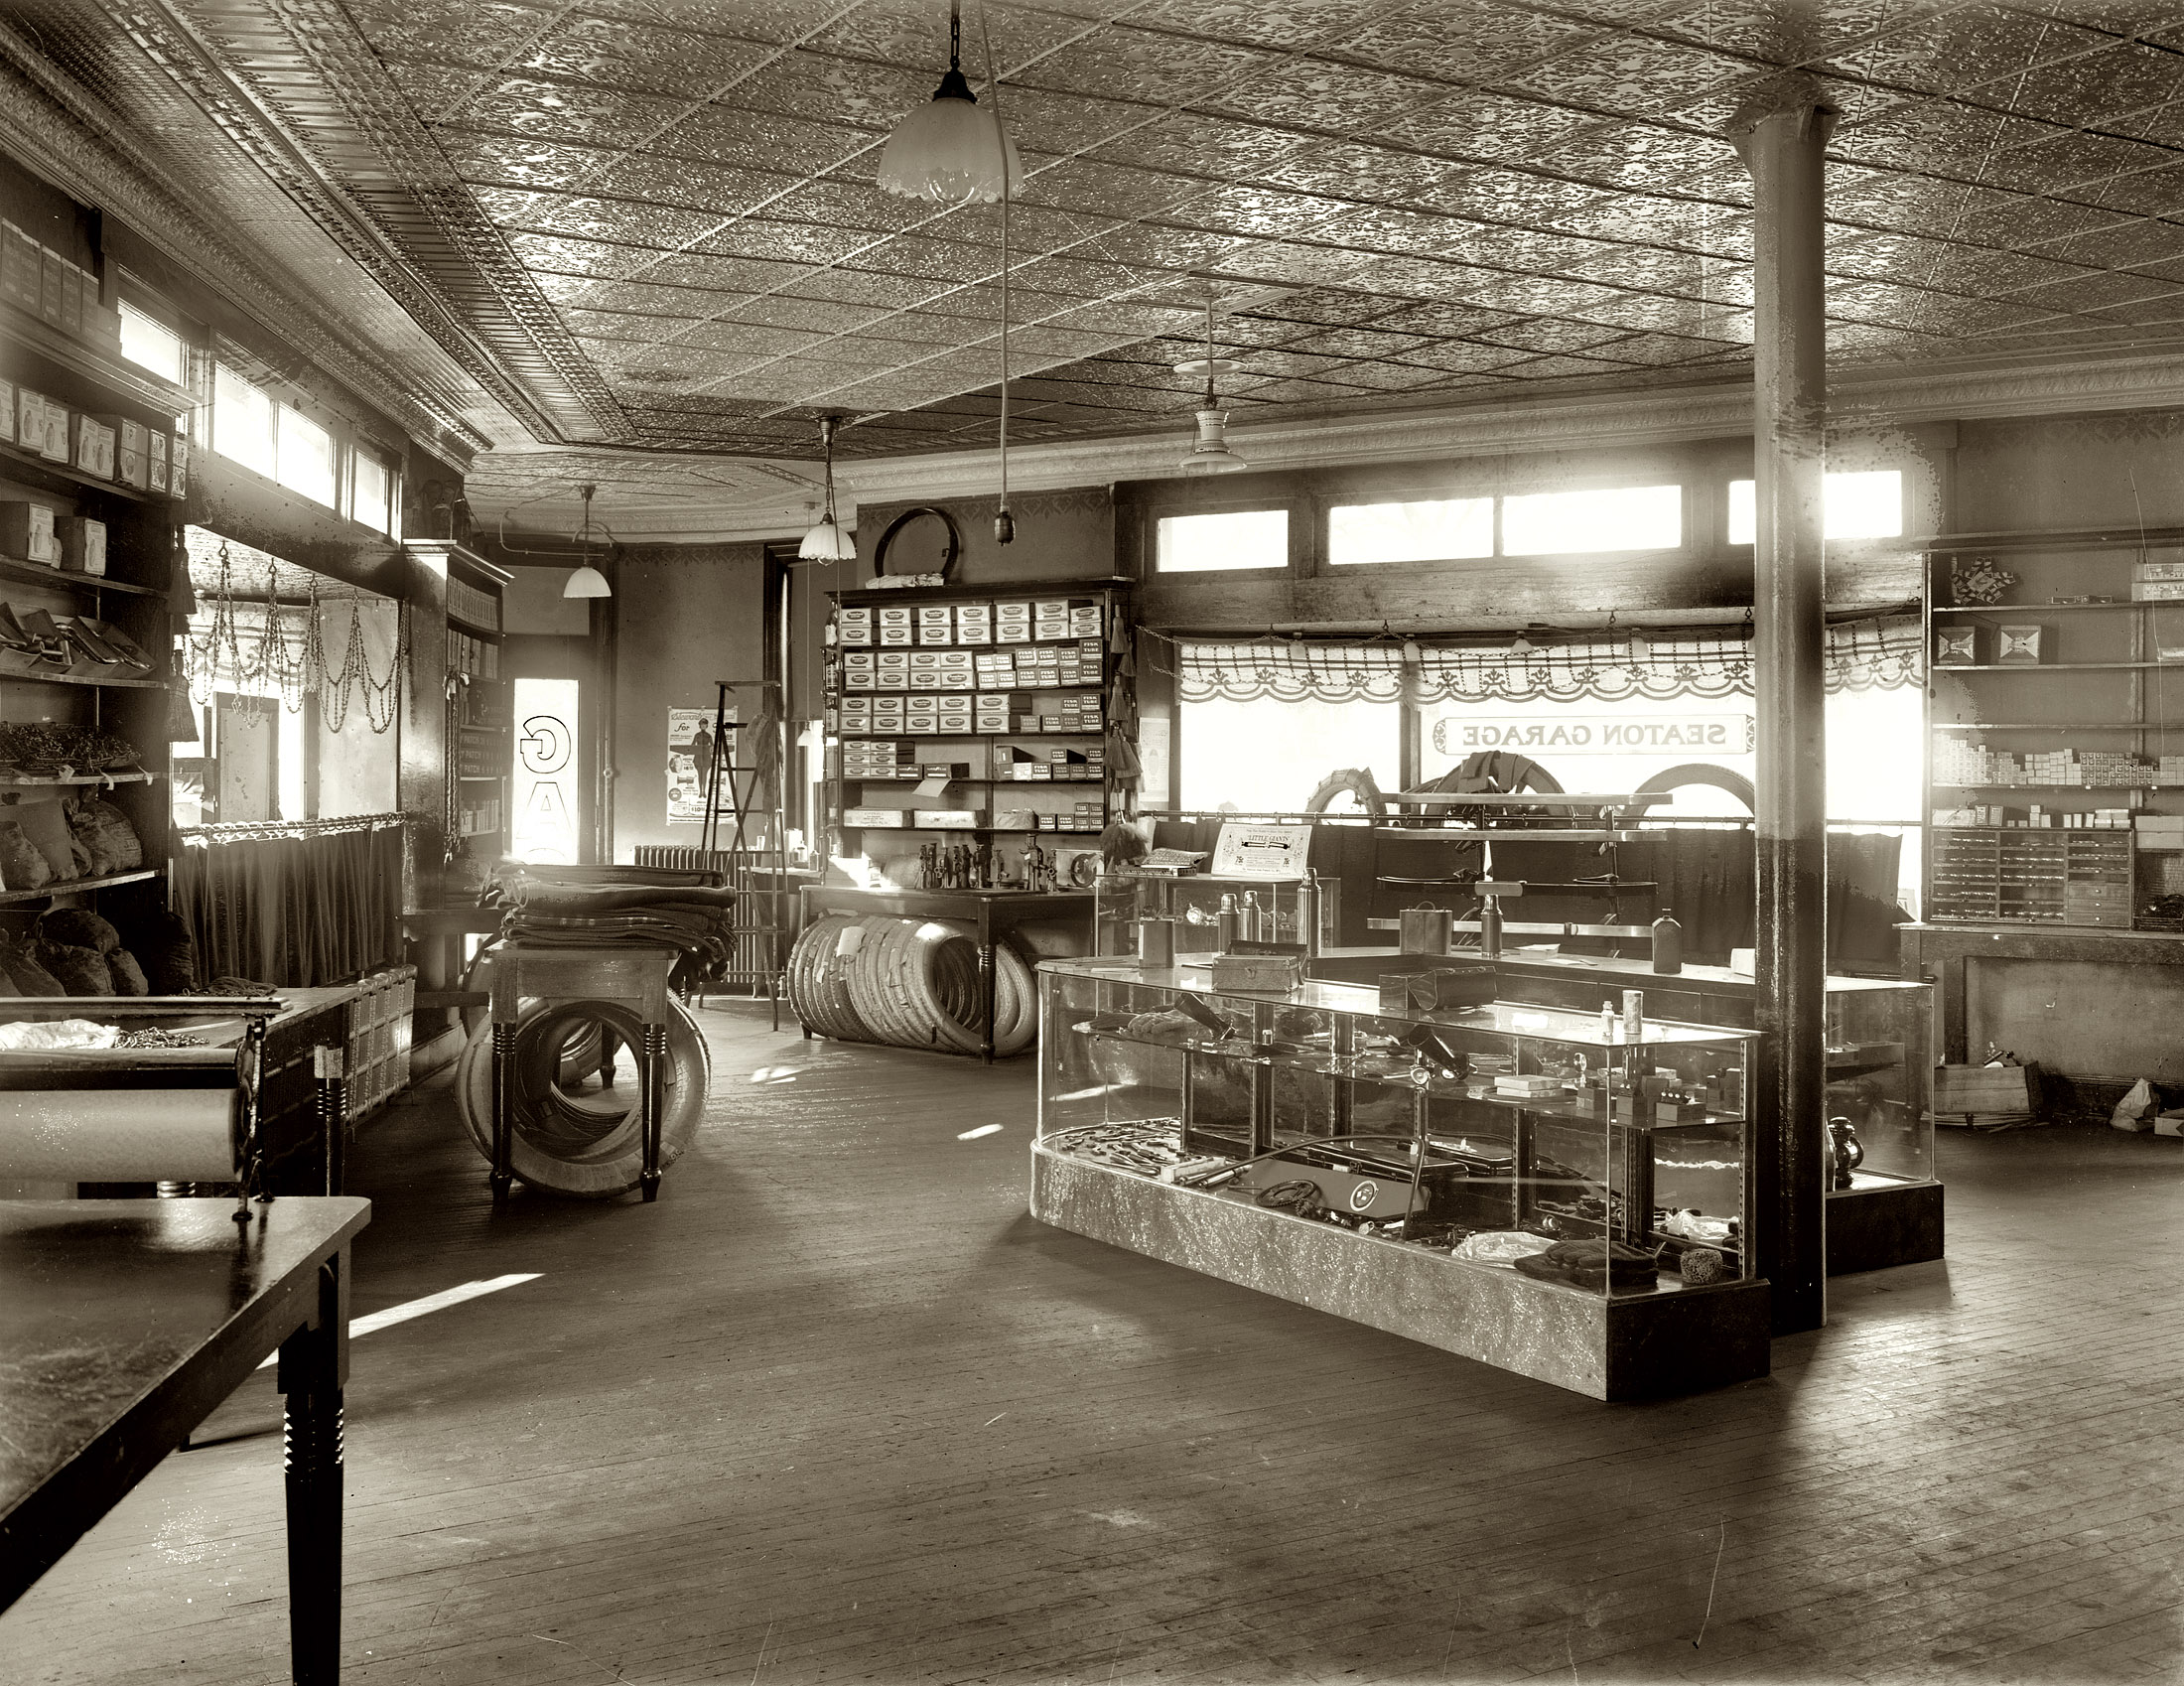 Washington, D.C. "Seaton Garage and Supply House, interior. 1919 or 1920." View full size. National Photo Company Collection glass negative.